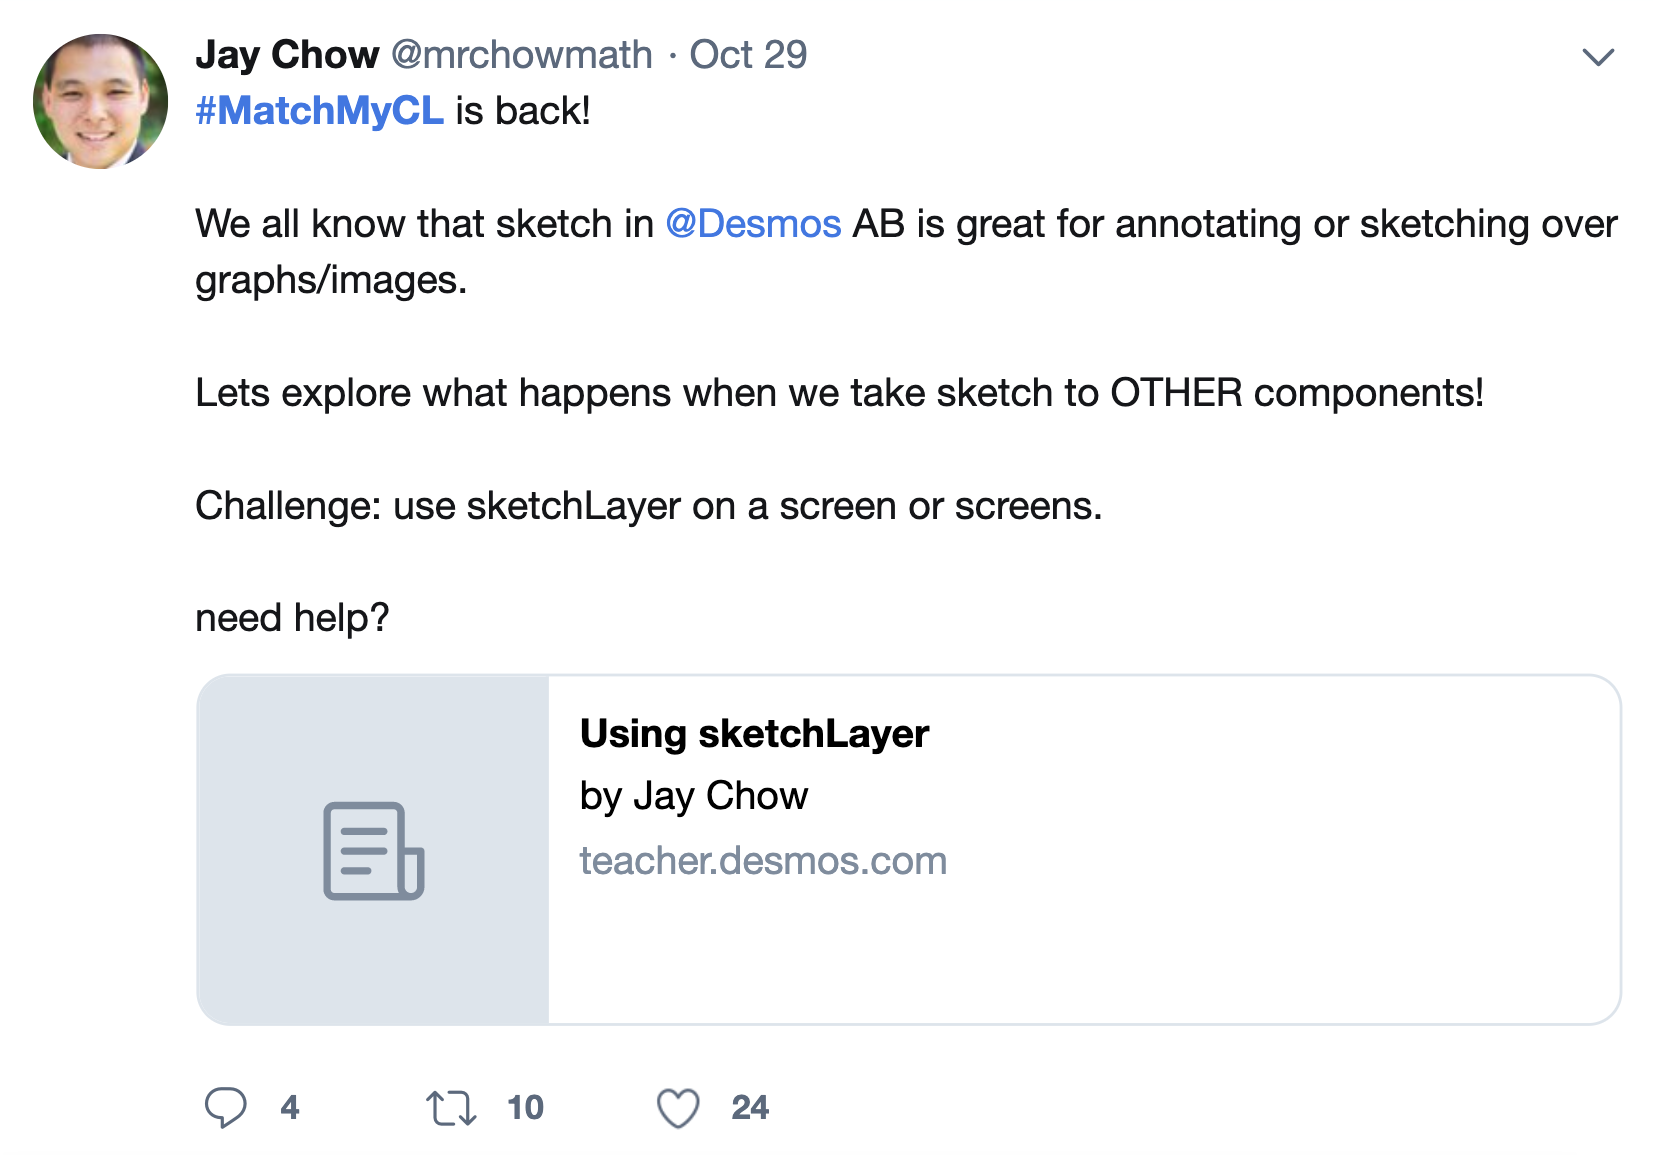 Tweet from Jay Chow using the match my CL hashtag. "Let's explore what happens when we take sketch to OTHER components. Use sketchLayer on a screen or screens."